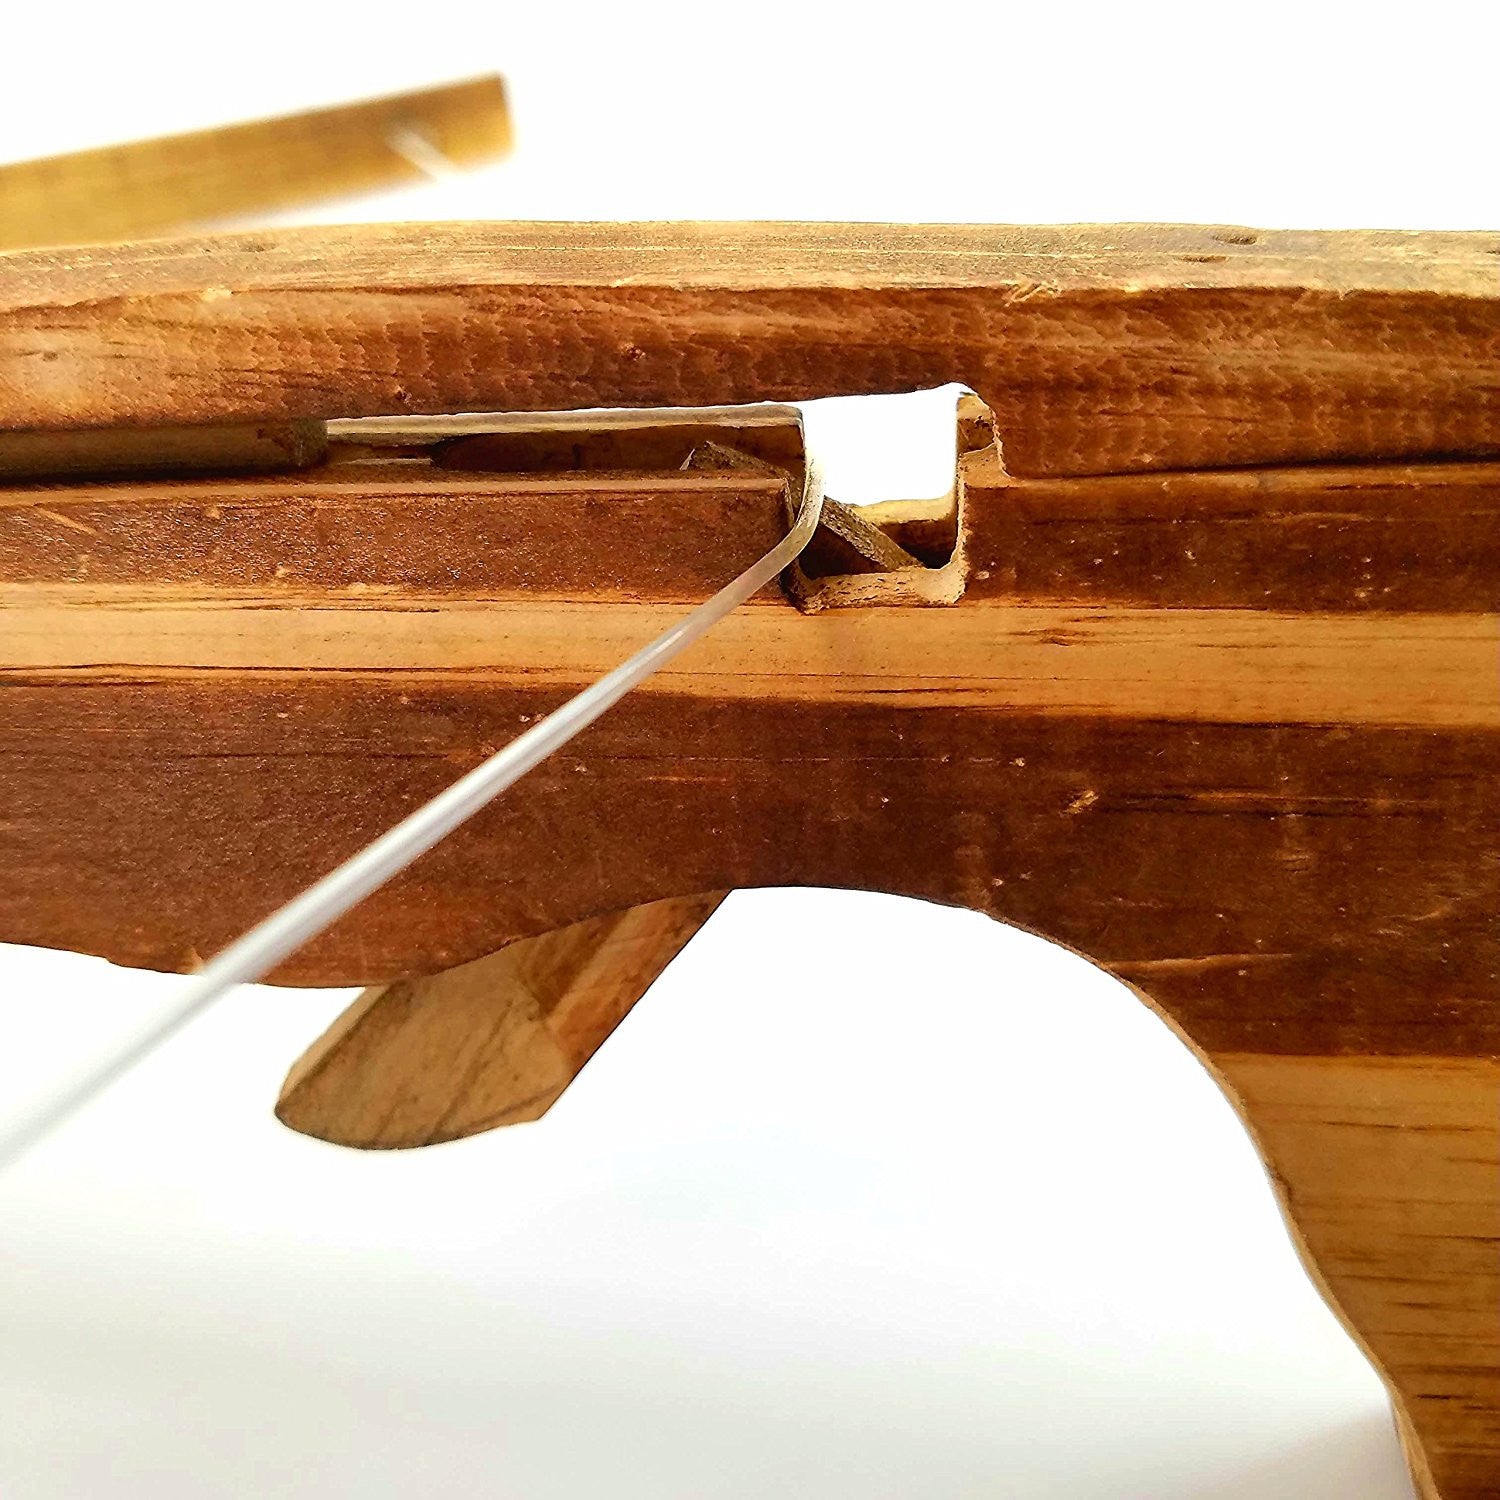 Wooden Toy Crossbow and Arrows